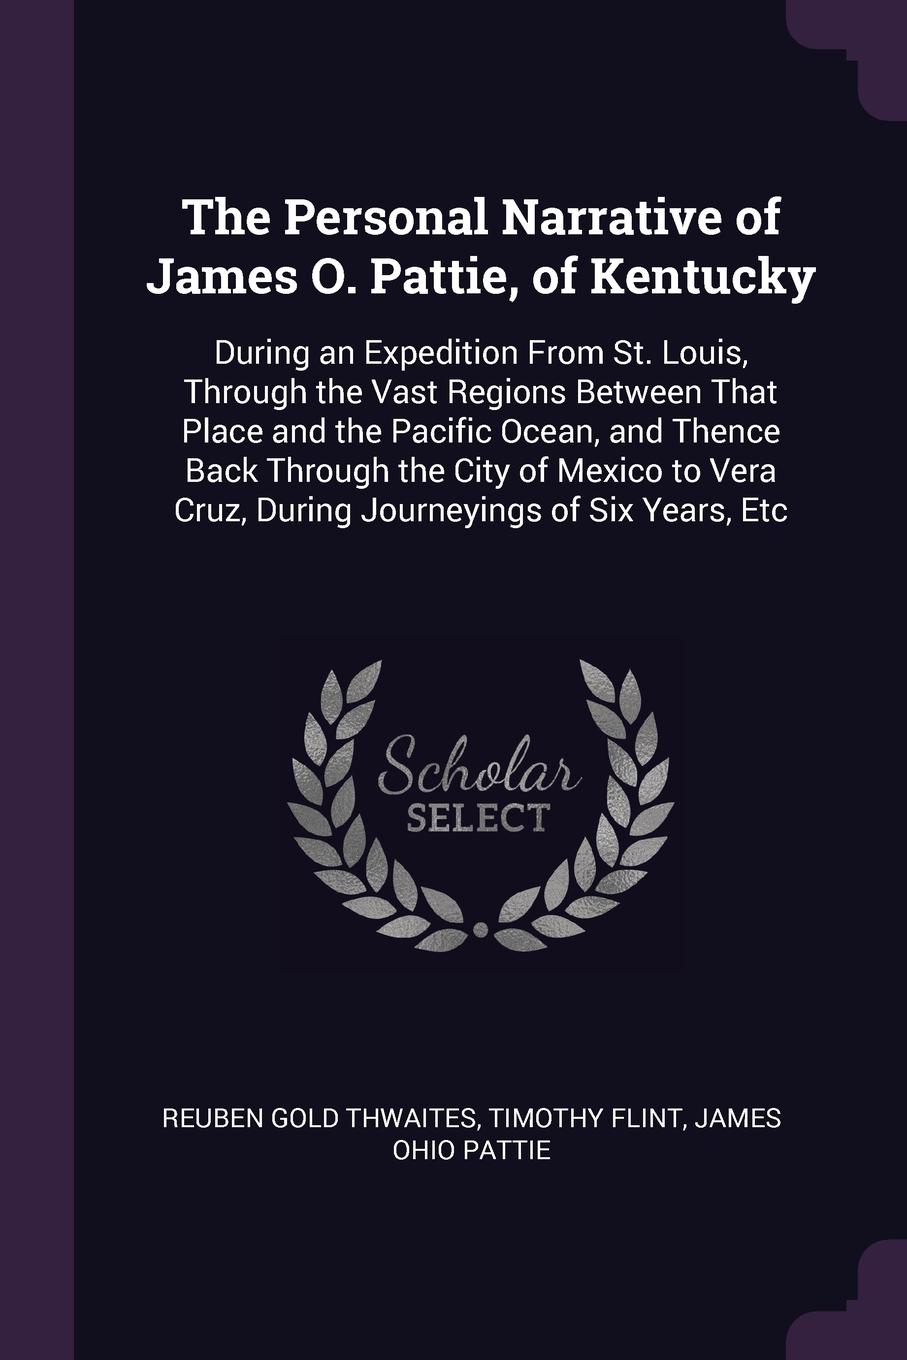 The Personal Narrative of James O. Pattie, of Kentucky. During an Expedition From St. Louis, Through the Vast Regions Between That Place and the Pacific Ocean, and Thence Back Through the City of Mexico to Vera Cruz, During Journeyings of Six Year...